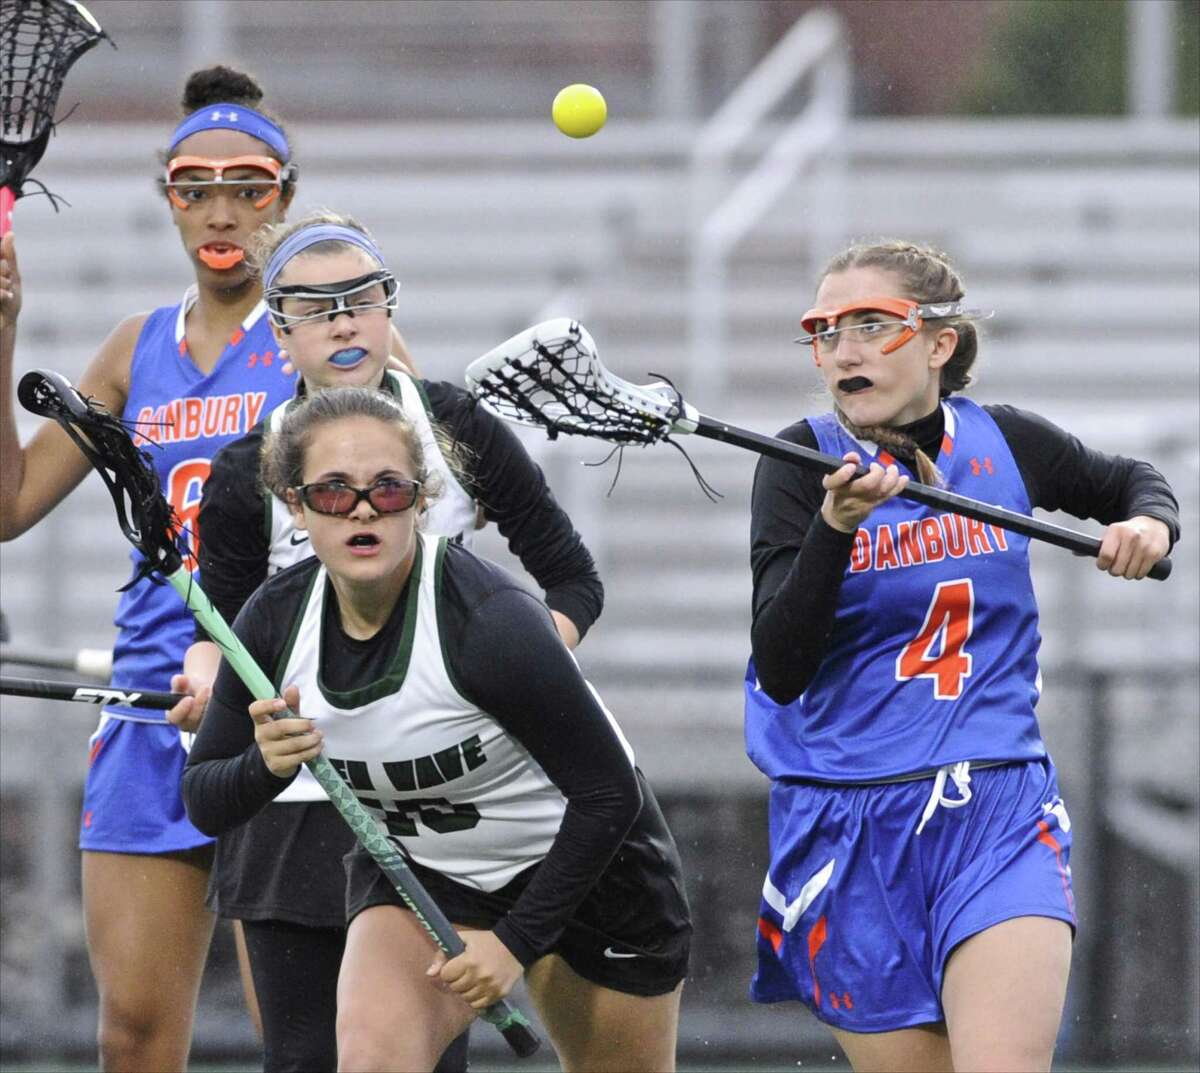 Danbury's Joelene Heffern (4) reaches for the ball in front of New Milford's Julia Venezia (10 in the girls lacrosse game between Danbury and New Milford high schools, on Tuesday afternoon, April 25, 2017, at New Milford High School, in New Milford, Conn. New Milford's Kelly Lourenco (16) and Danbury's Ciara Tonic (6) are behind the play.